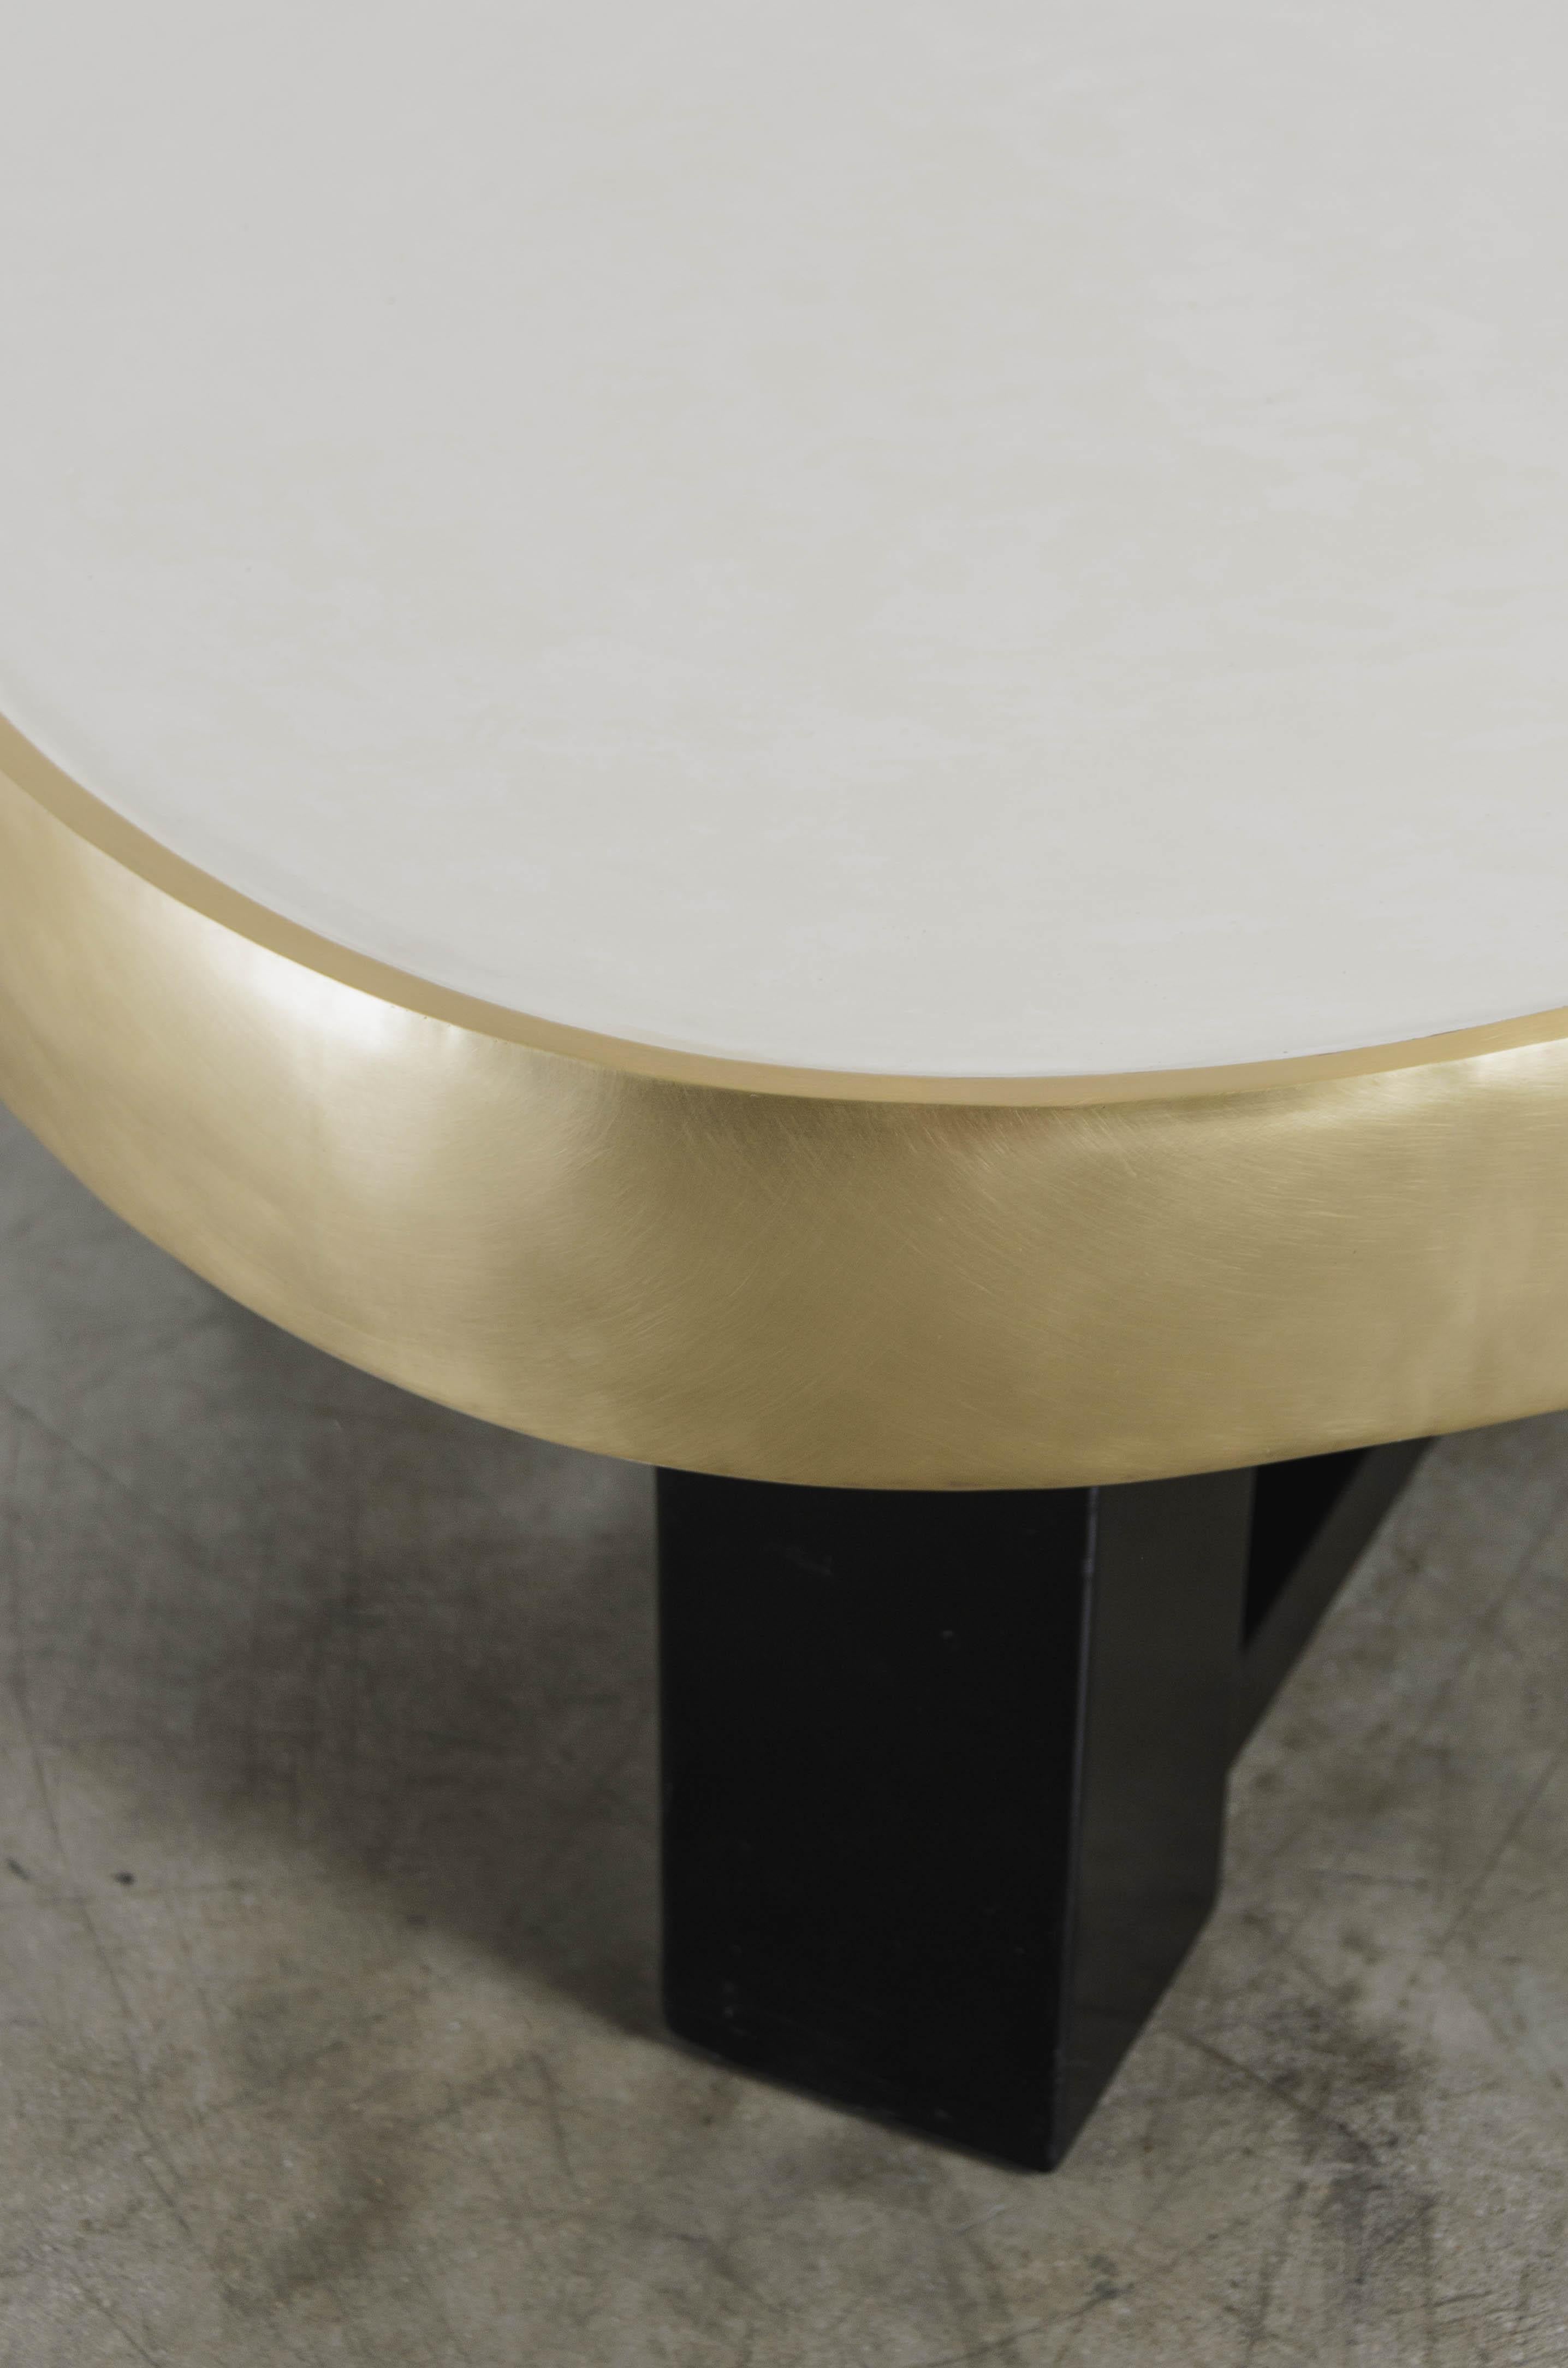 Repoussé Contemporary Cream Lacquer Oblong Cocktail Table with Brass Trim by Robert Kuo For Sale